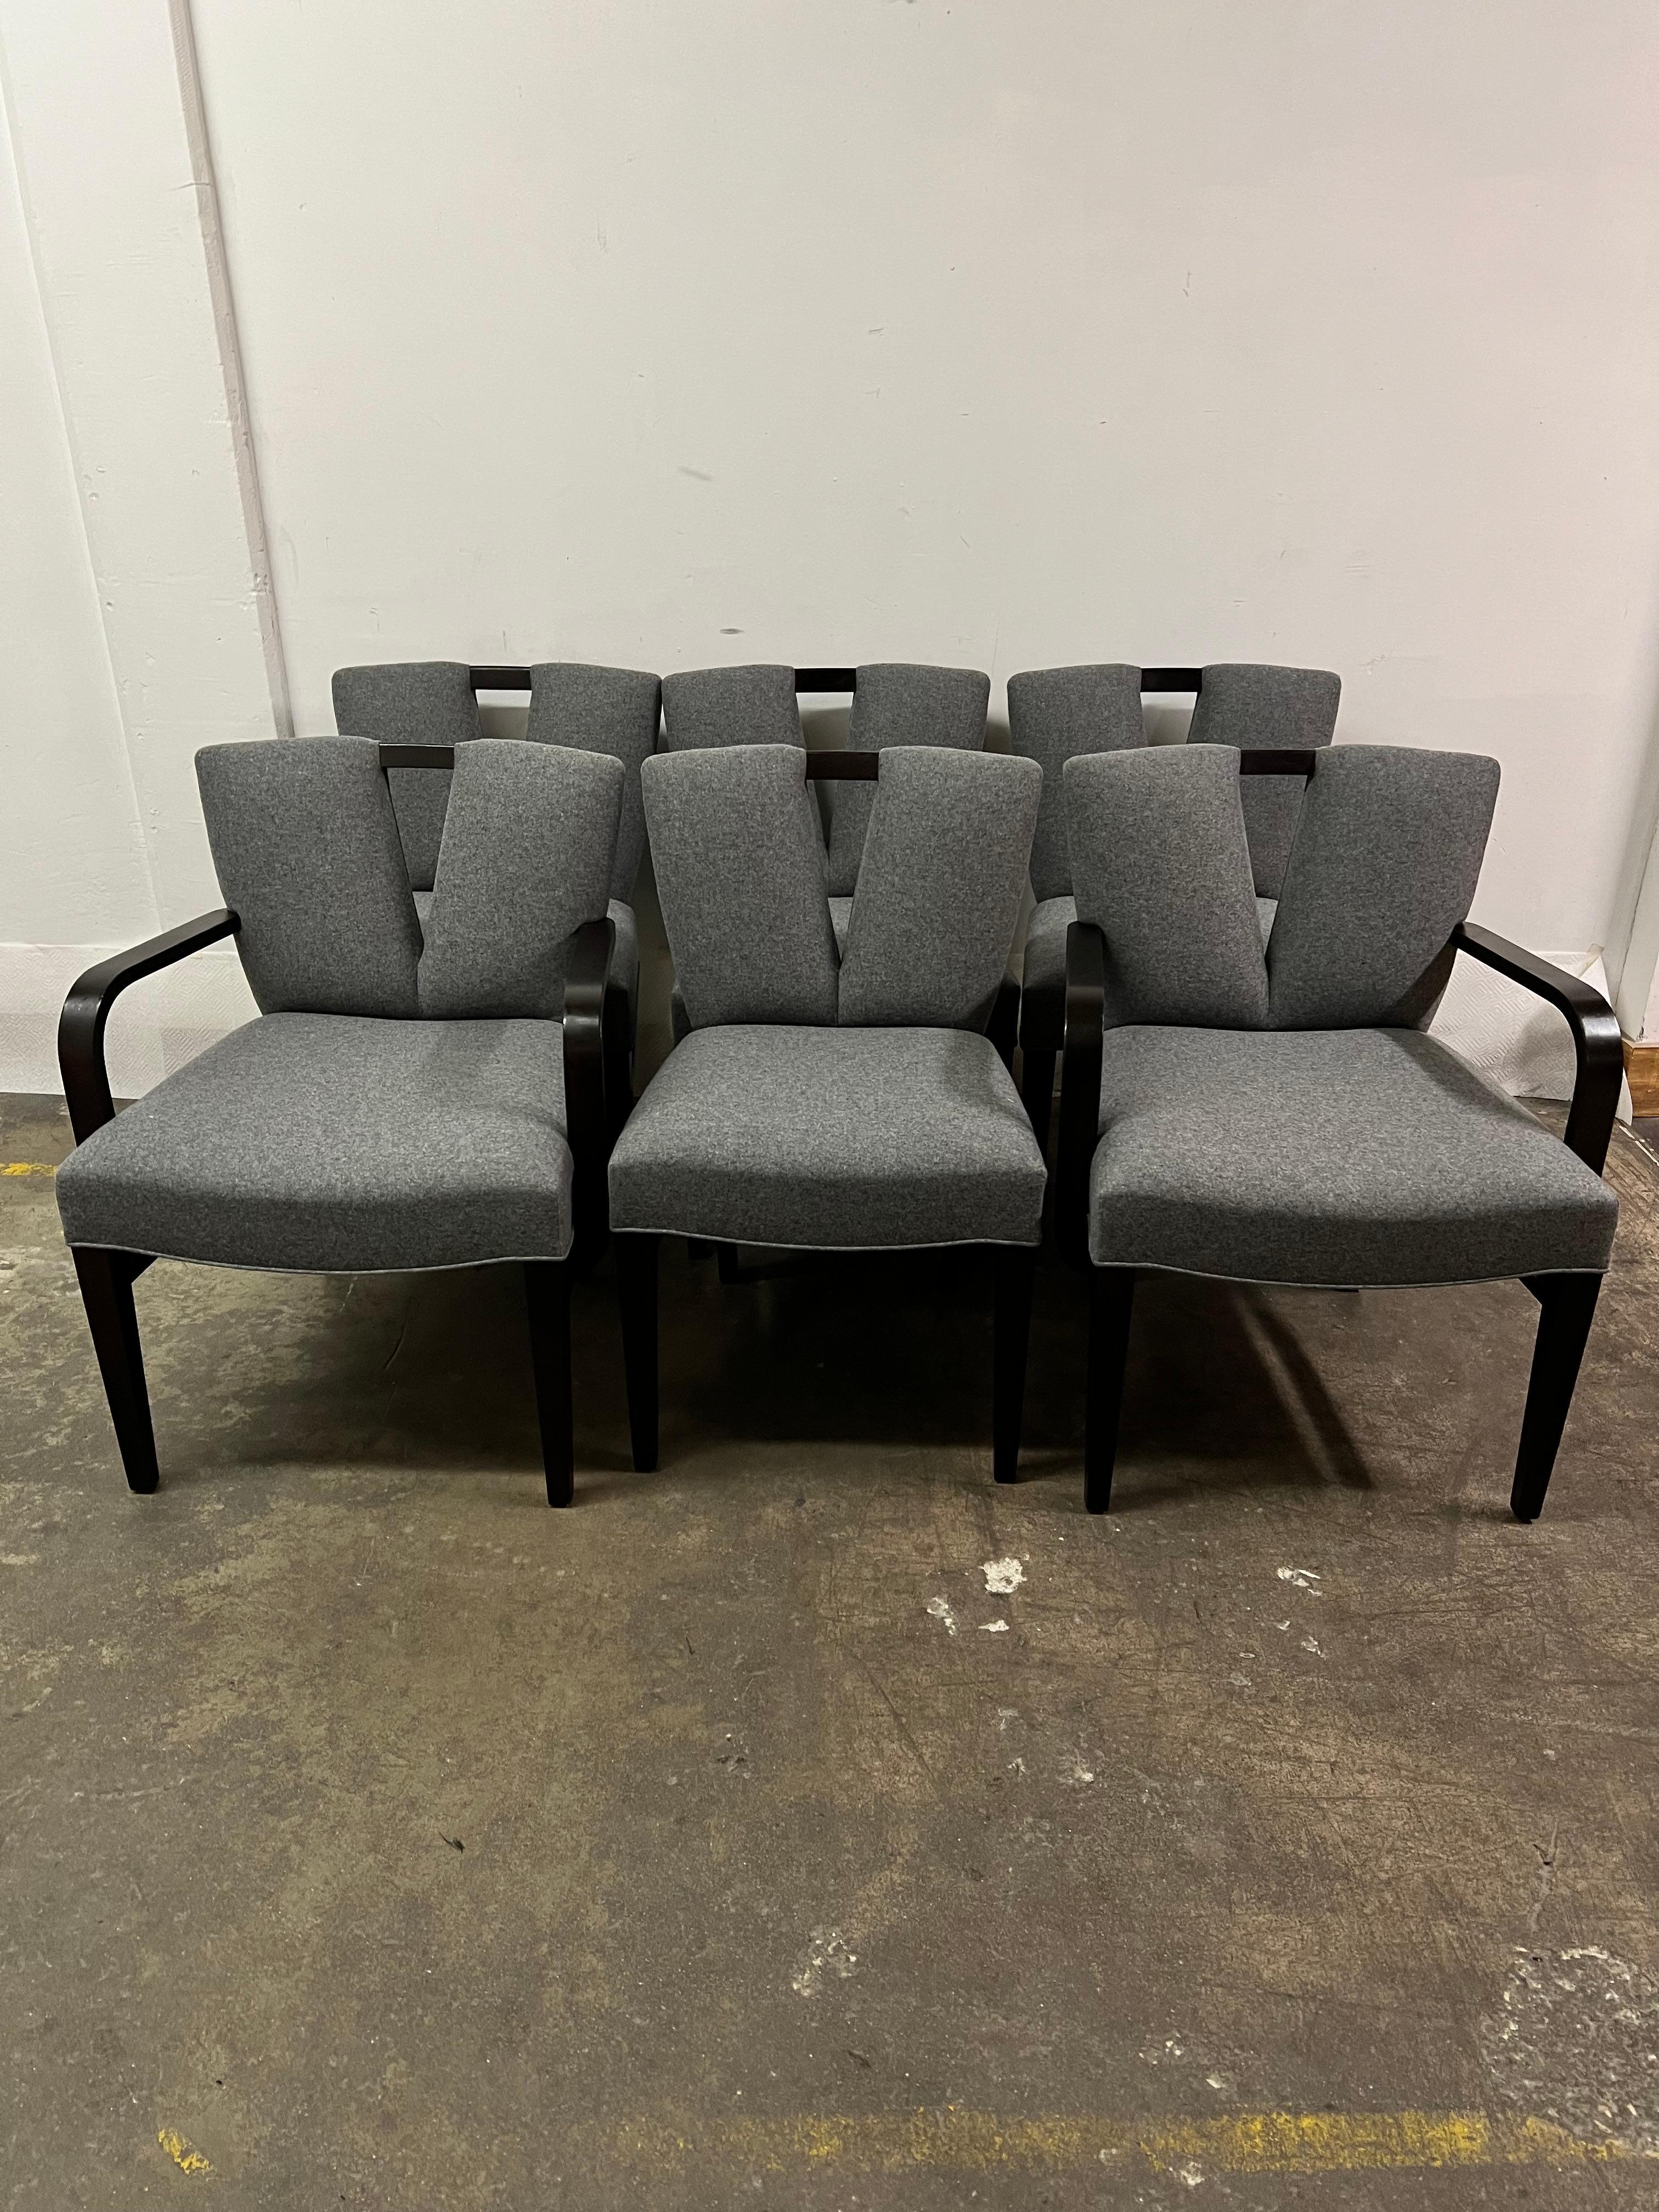 A true Mid Century set of Paul Frankl Corset Dining room Chairs.  The 